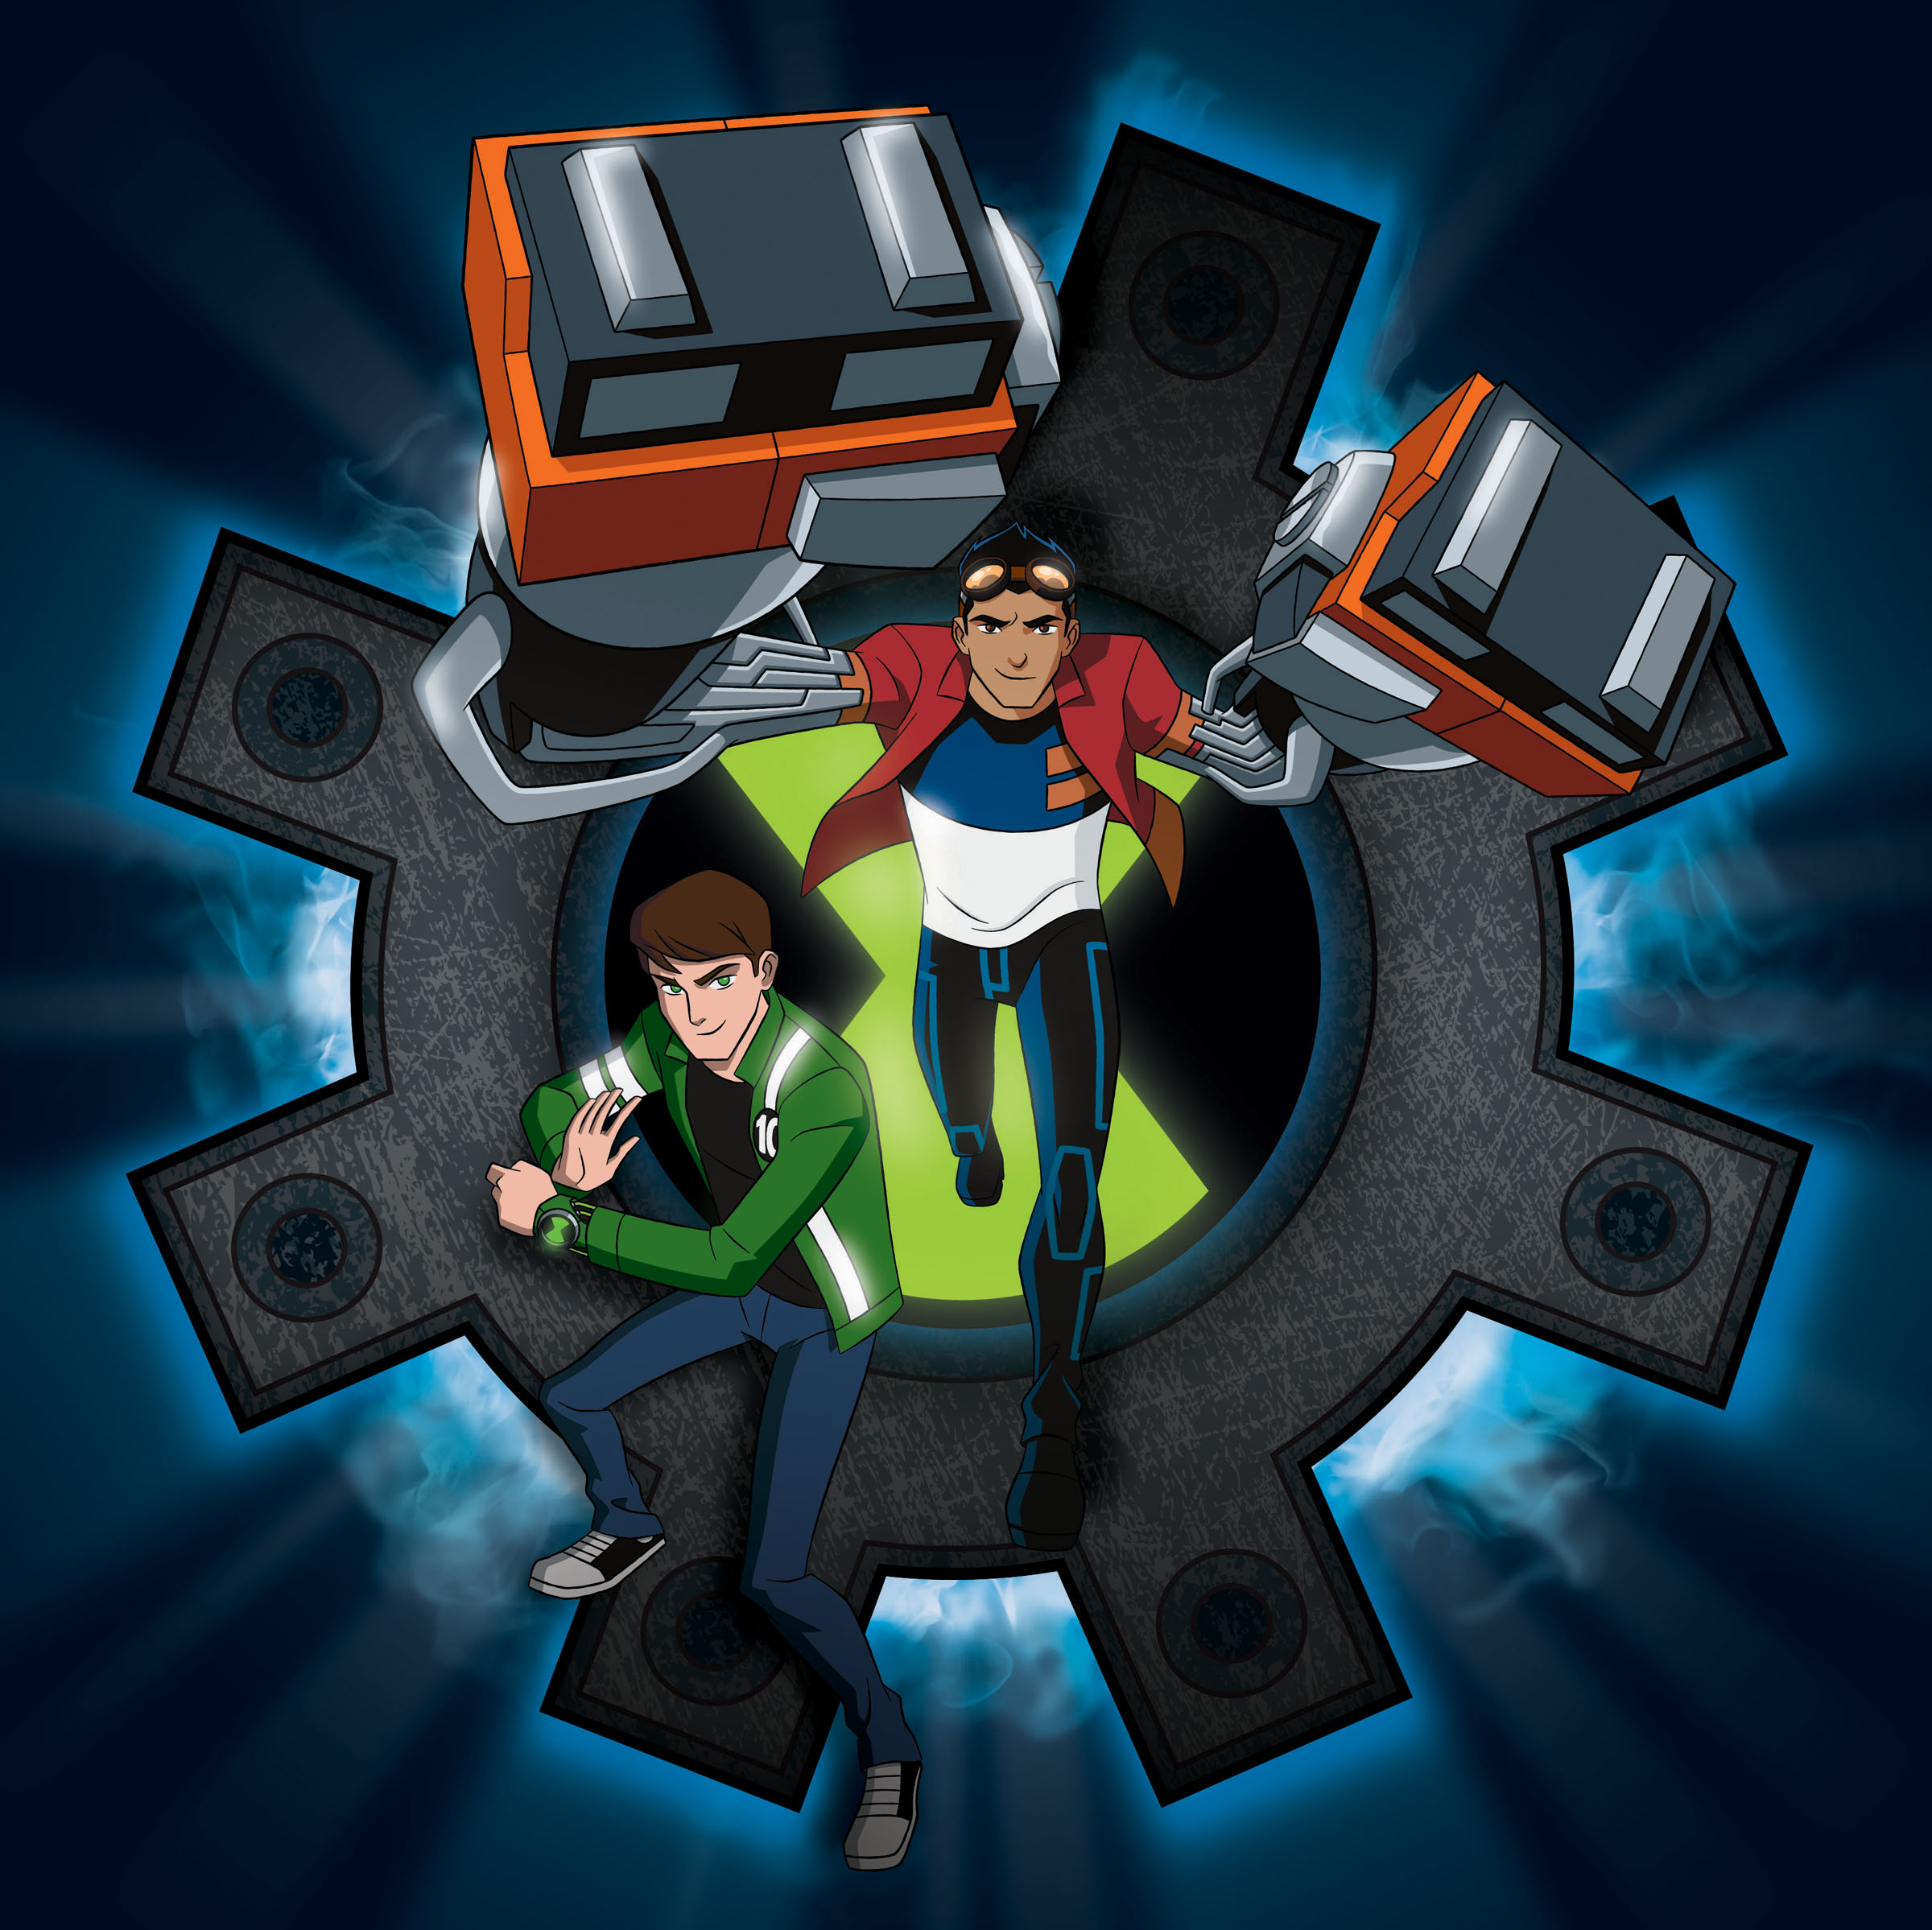 To contaminate Sortie Ringback Angel DMM on Twitter: "Ben 10/Generator Rex: Heroes United; before &amp;  after... In honor to their 10th anniversary. It's a redraw of this  promotional artwork of Ben Tennyson &amp; Rex Salazar changing